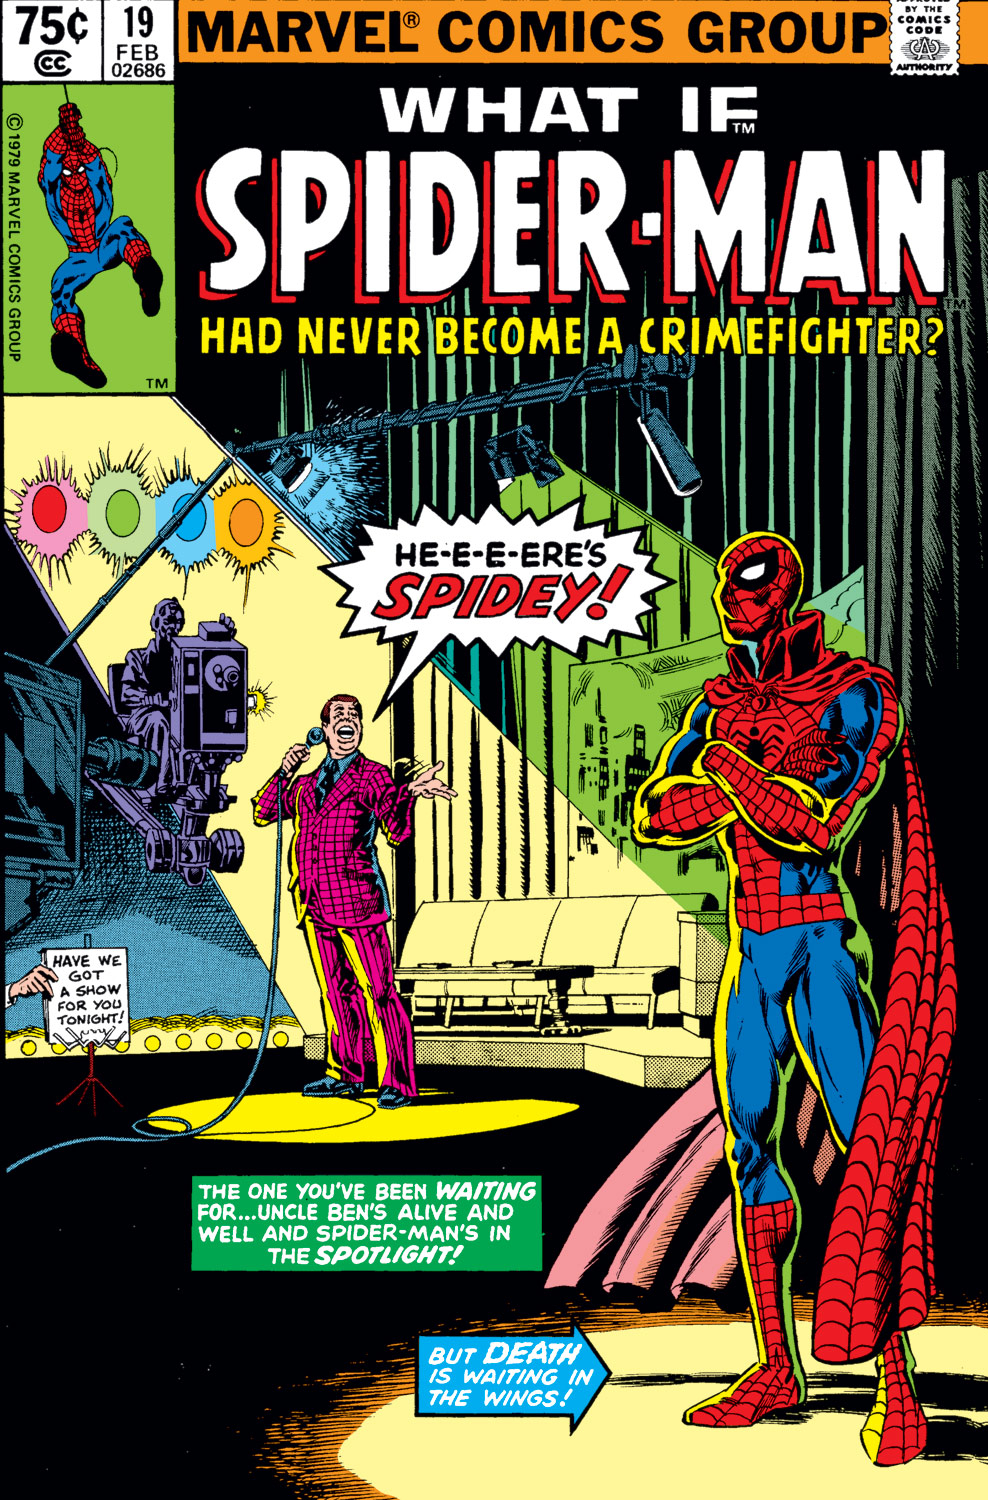 Read online What If? (1977) comic -  Issue #19 - Spider-Man had never become a crimefighter - 1